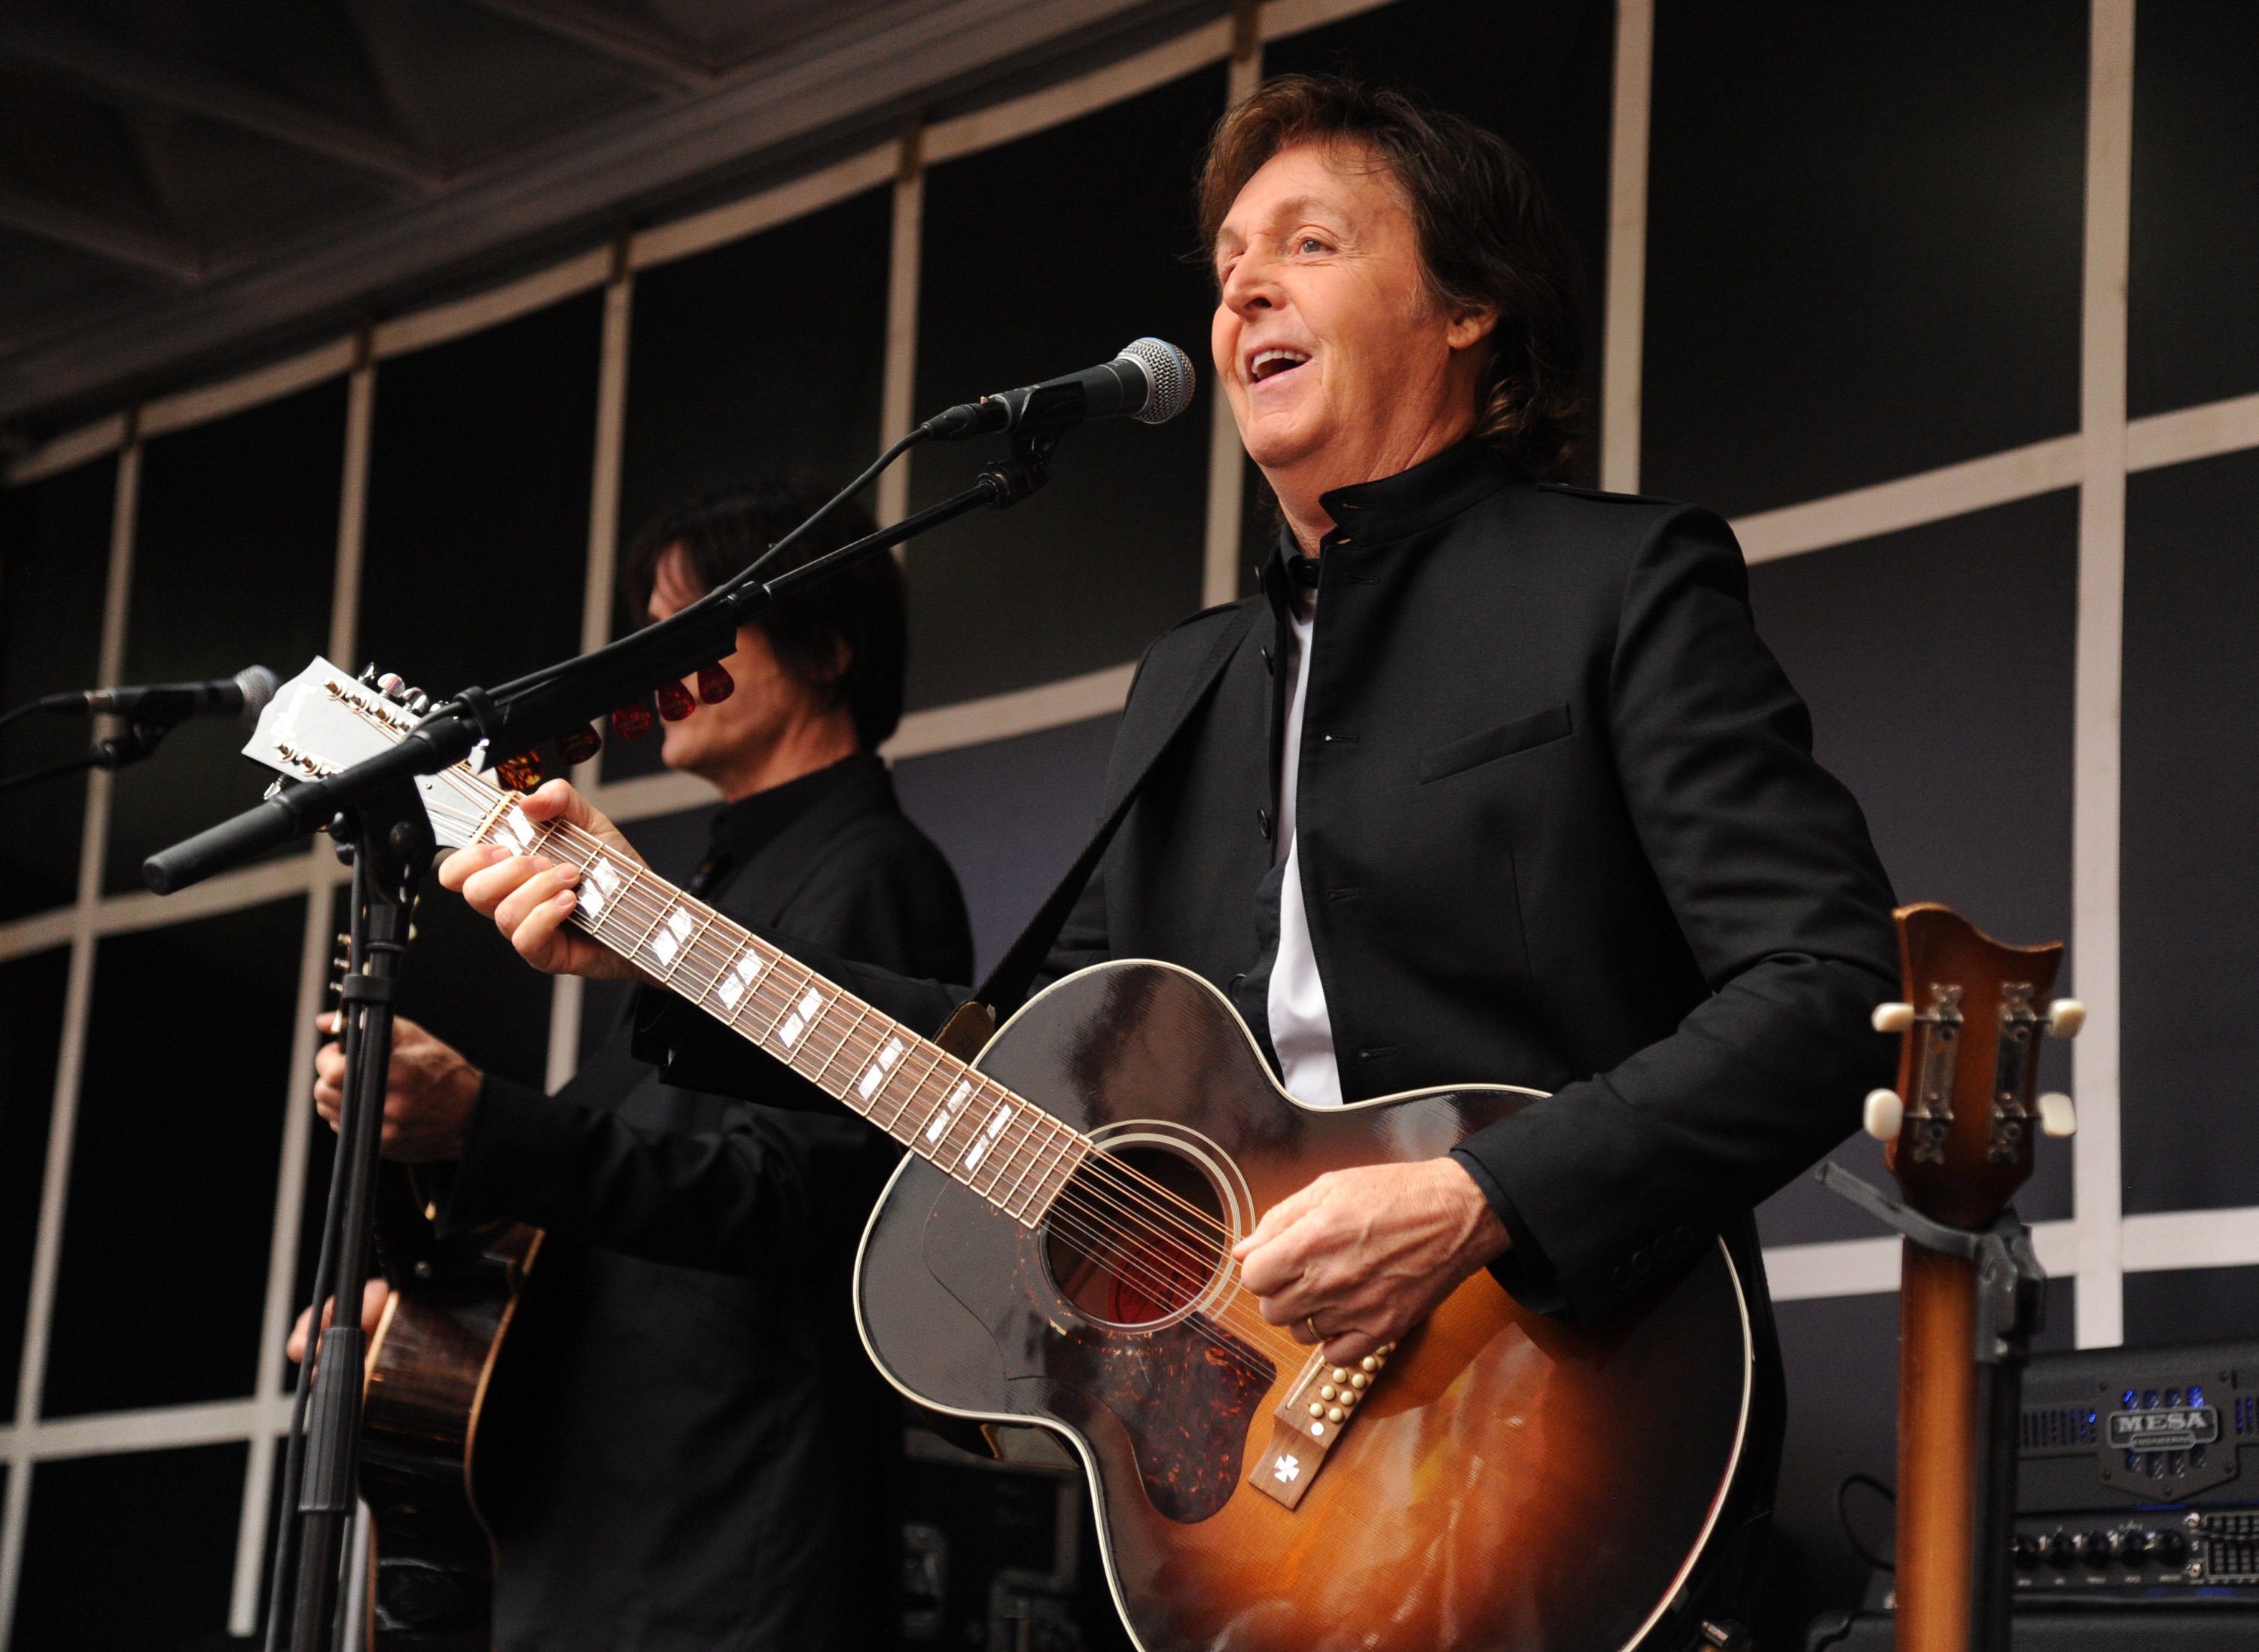 Paul McCartney performs songs at Times Square in New York City